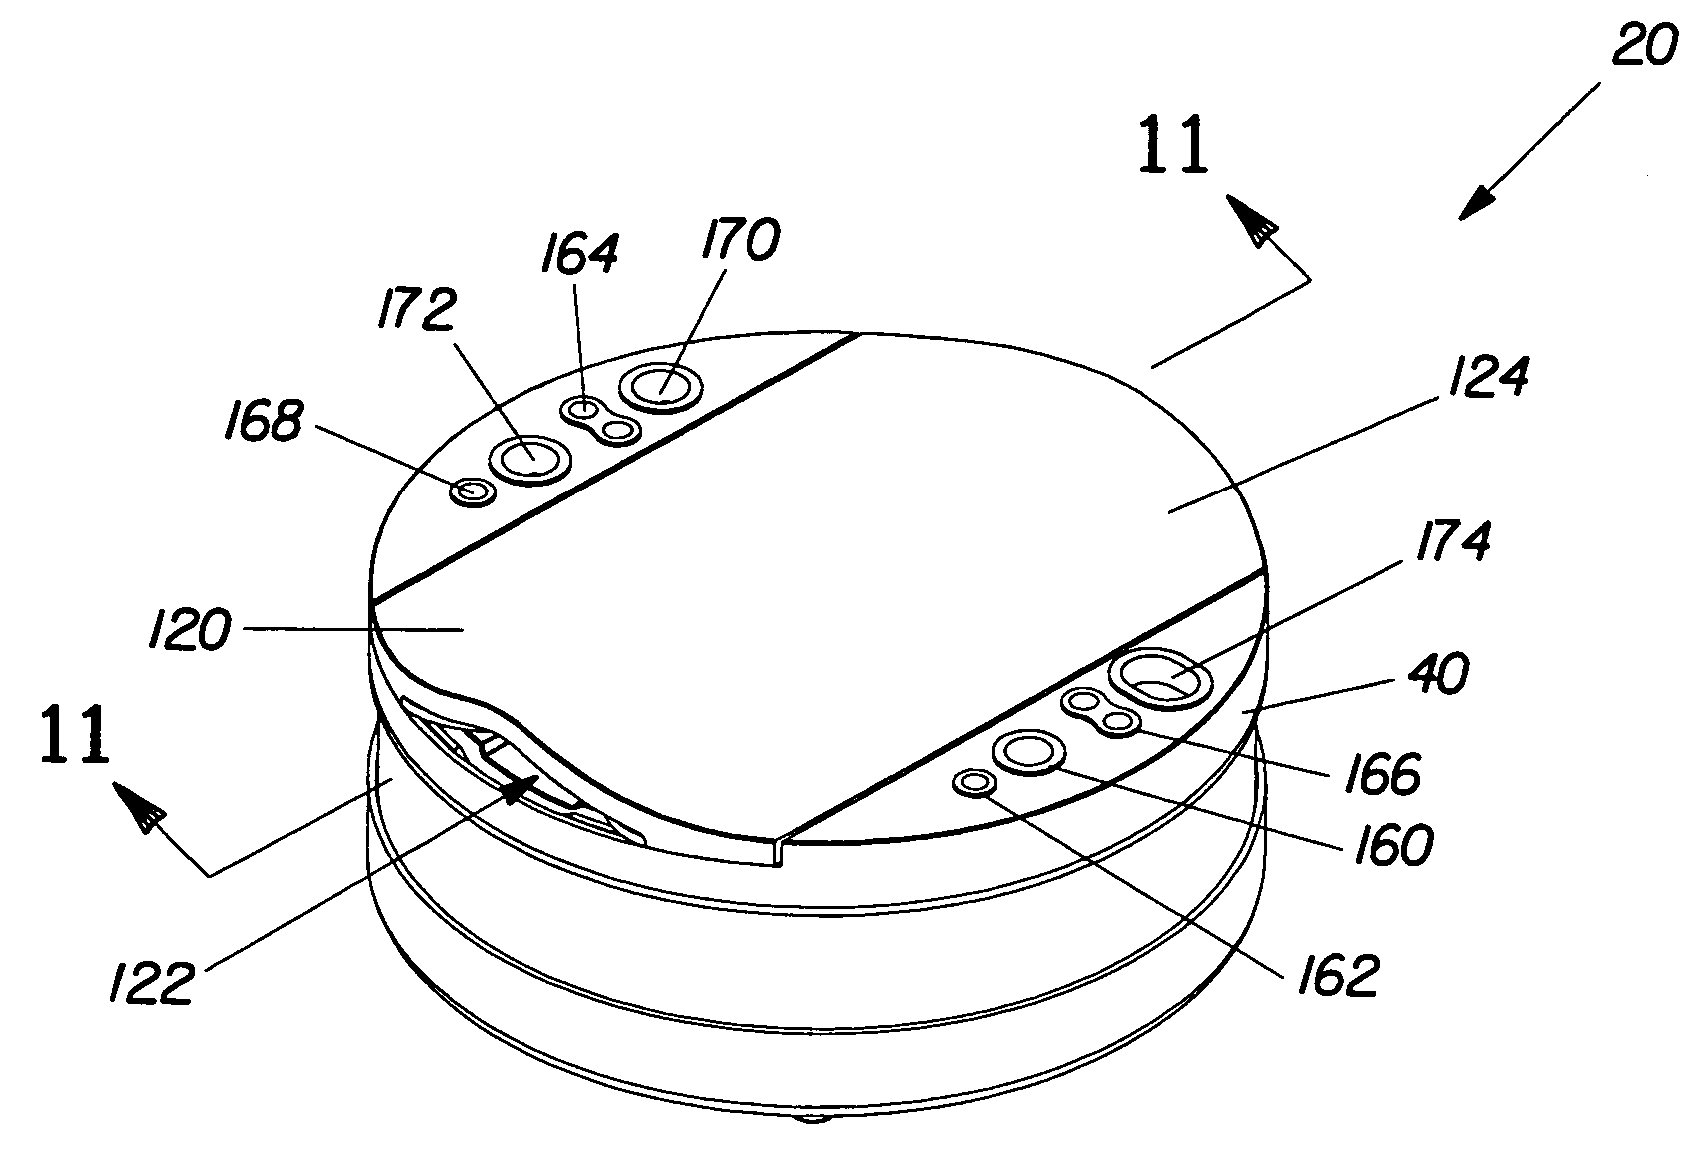 Articles, systems, and methods for dispensing volatile materials into the environment